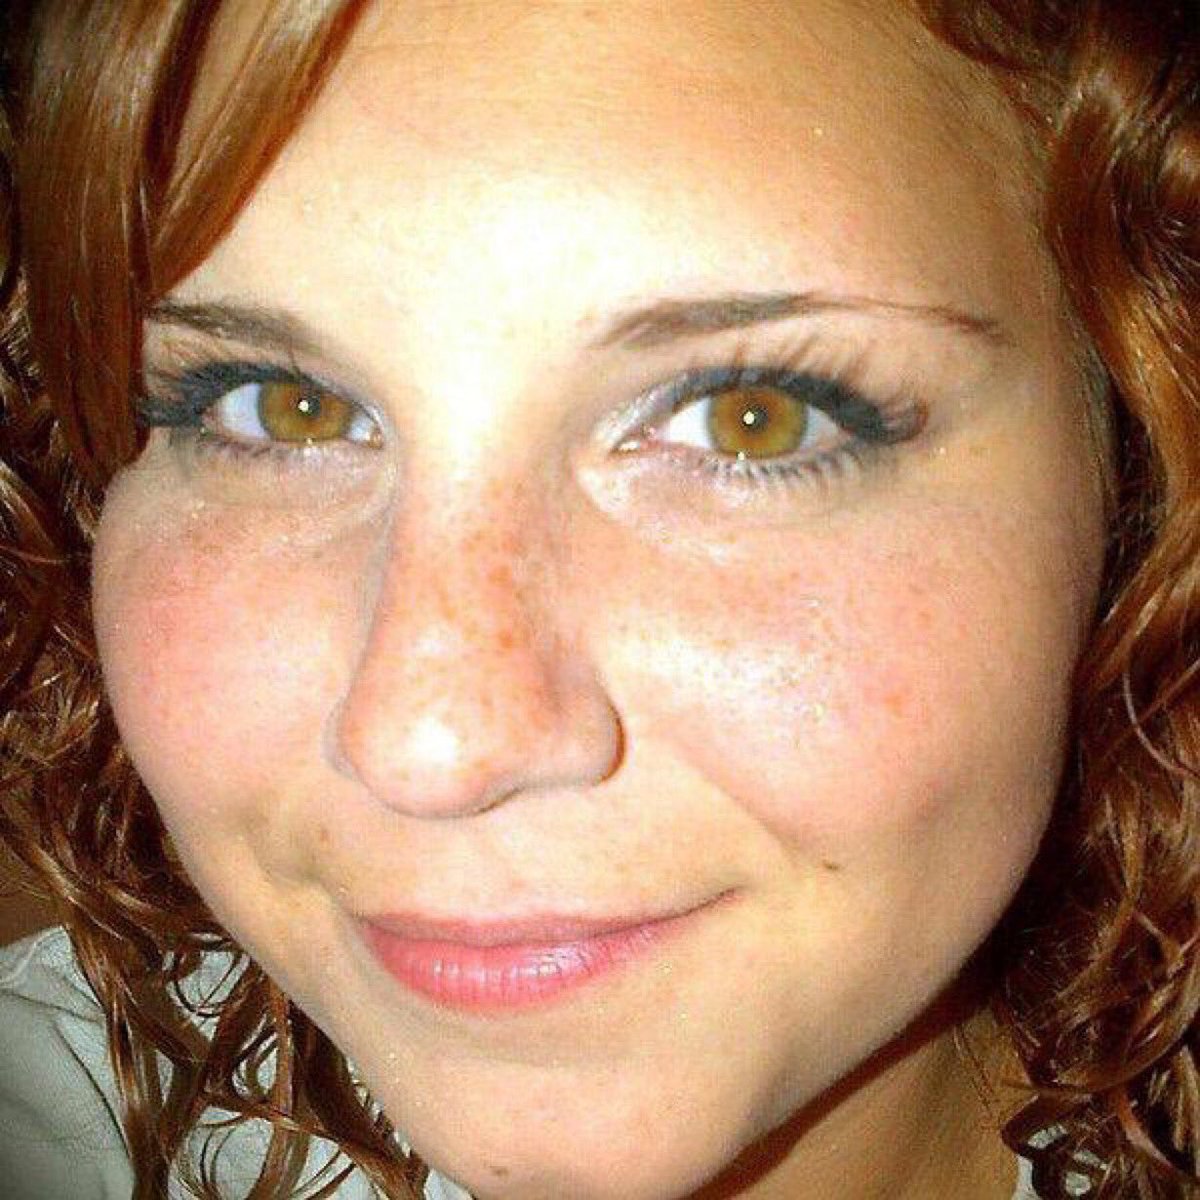 Remember Heather Heyer who was murdered 4 years ago in the Fascist march in Charlottesville. It was sad omen of what was to come in our country during the next four years. #REMEMBERHEATHERHEYER